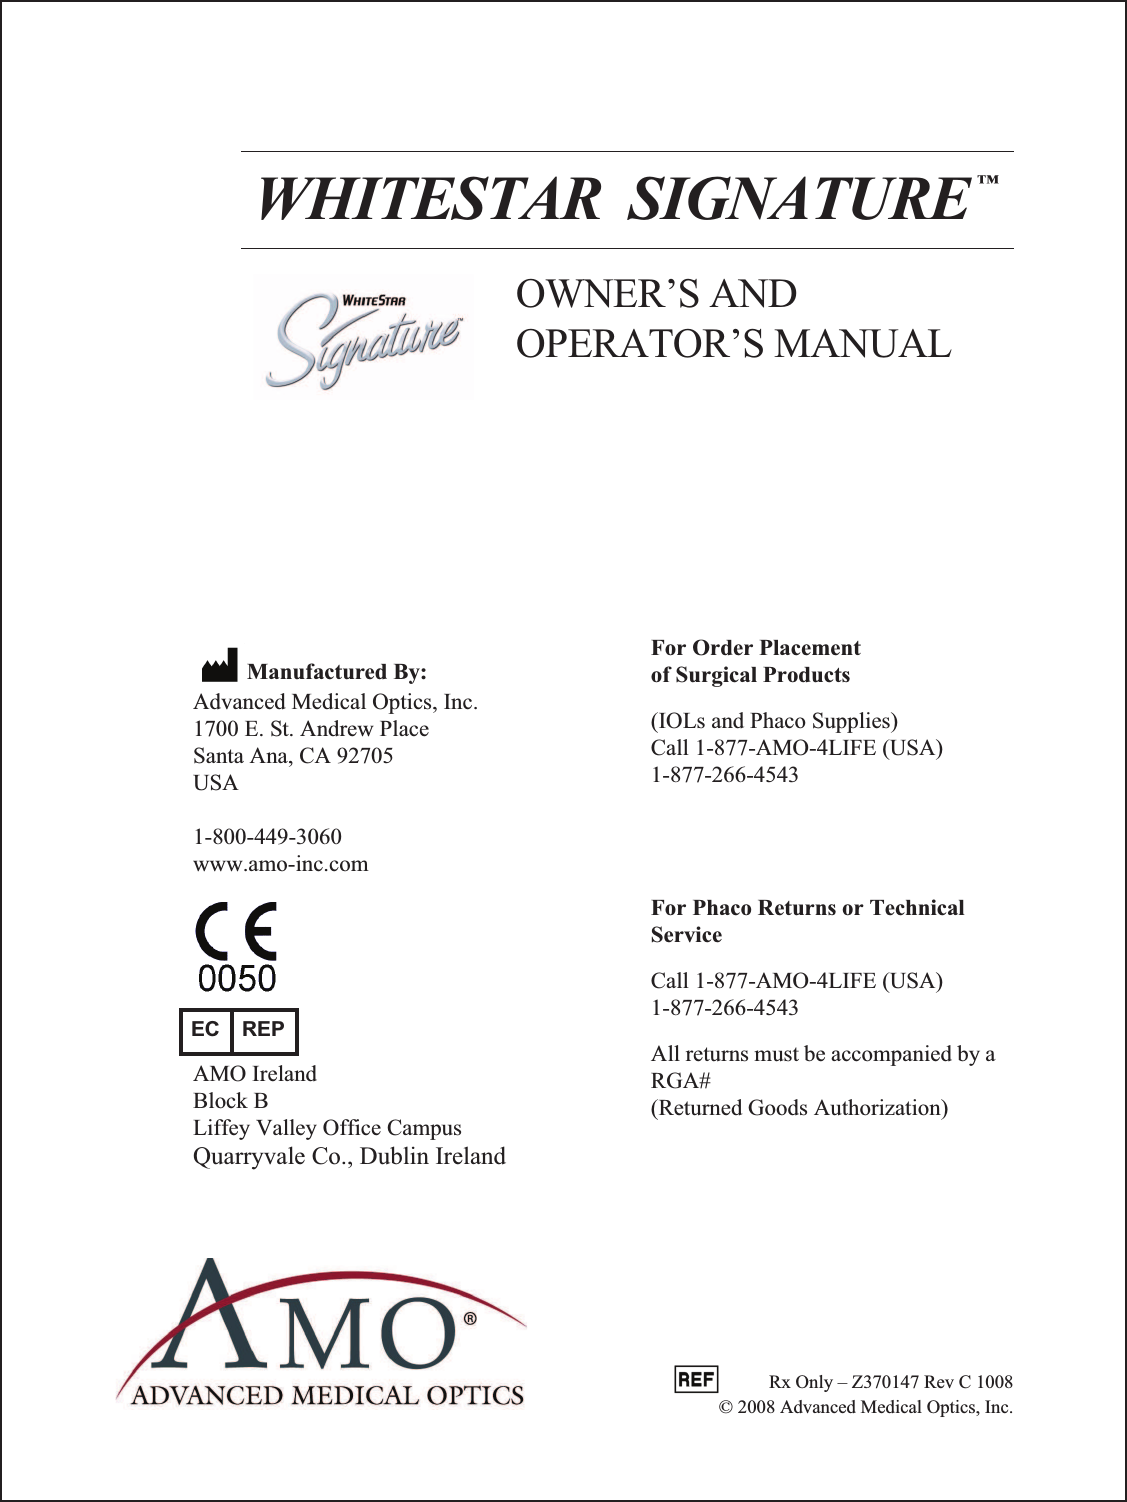 WHITESTAR  SIGNATURE ™OWNER’S AND OPERATOR’S MANUALManufactured By:Advanced Medical Optics, Inc.1700 E. St. Andrew PlaceSanta Ana, CA 92705USA1-800-449-3060www.amo-inc.comFor Order Placement of Surgical Products(IOLs and Phaco Supplies)Call 1-877-AMO-4LIFE (USA)1-877-266-4543For Phaco Returns or Technical ServiceCall 1-877-AMO-4LIFE (USA)1-877-266-4543All returns must be accompanied by a RGA#(Returned Goods Authorization)EC REPAMO IrelandBlock B Liffey Valley Office CampusQuarryvale Co., Dublin Ireland          Rx Only – Z370147 Rev C 1008© 2008 Advanced Medical Optics, Inc. 